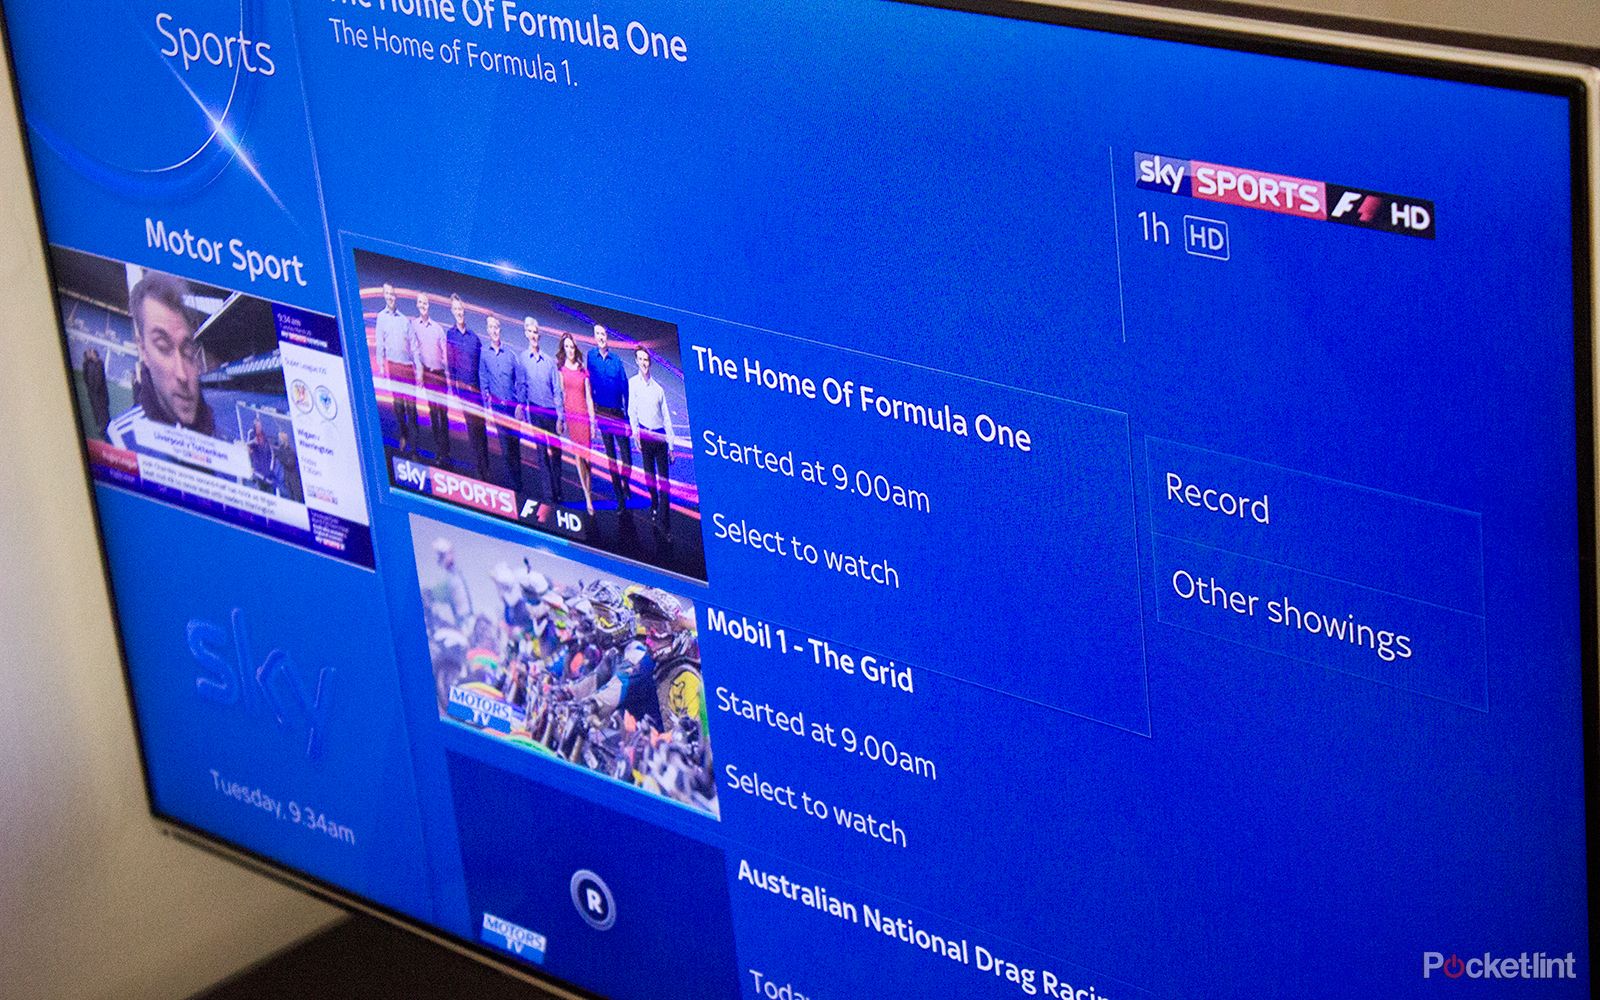 sky to show formula 1 in 4k uhd from 2017 image 1